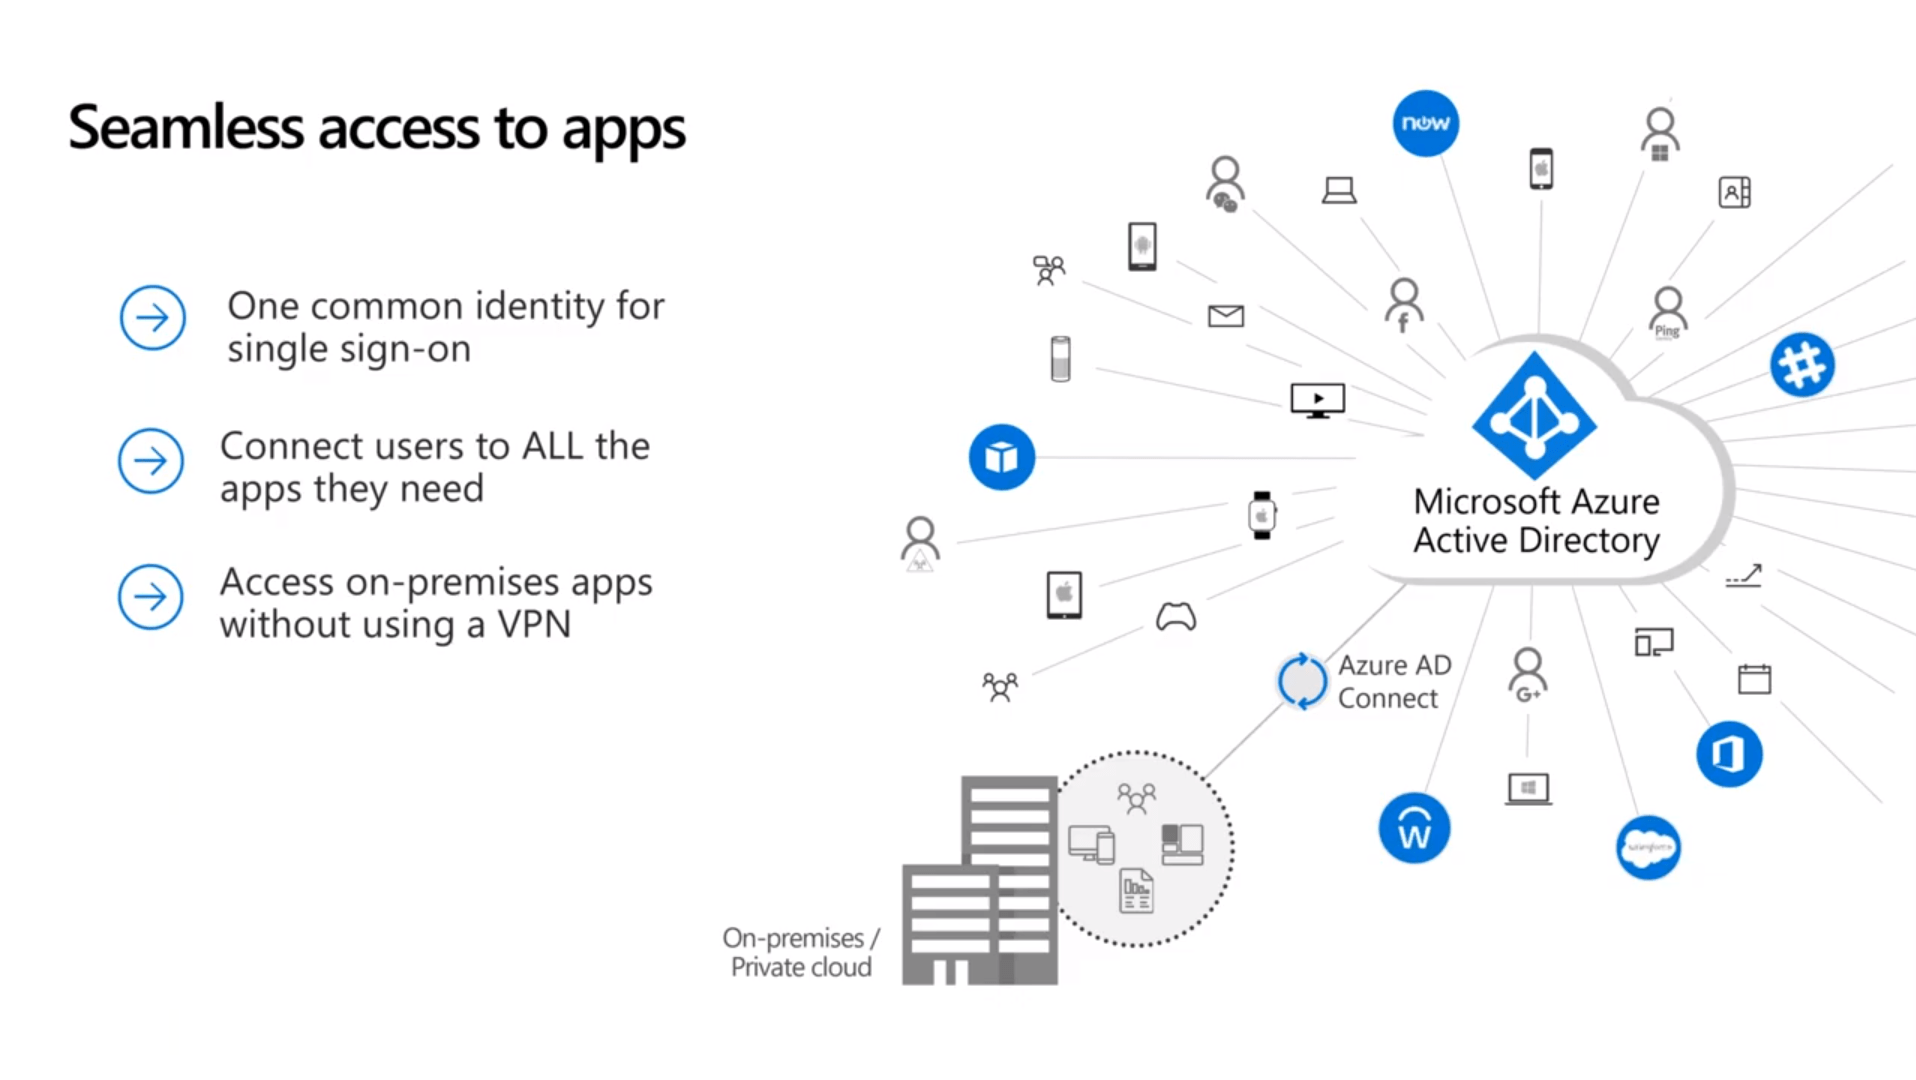 Seamless access to apps